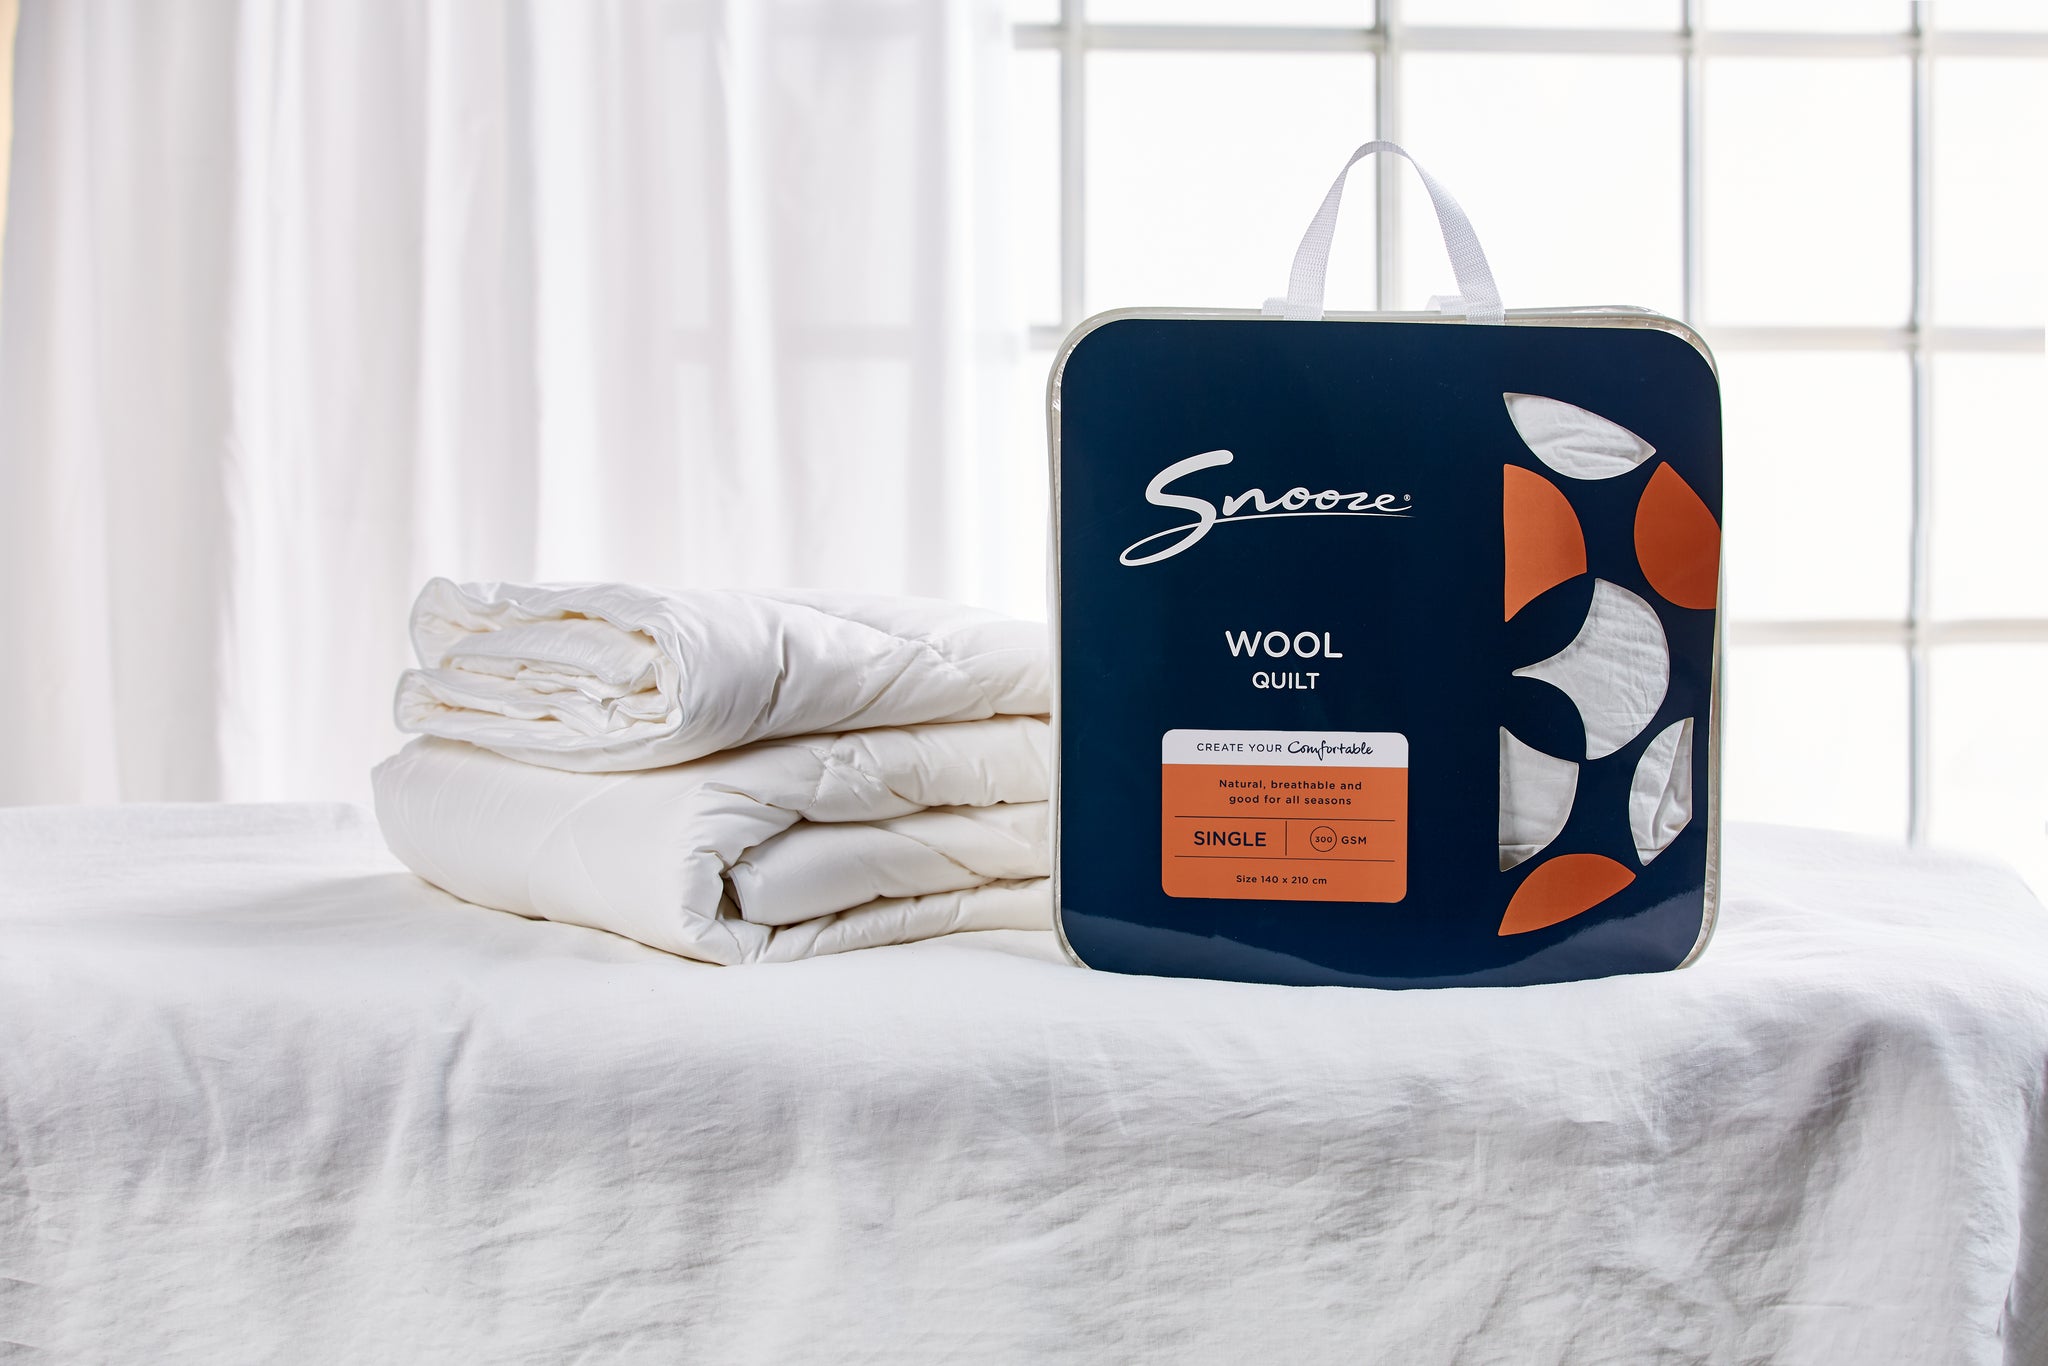 Snooze Wool Quilt 300g